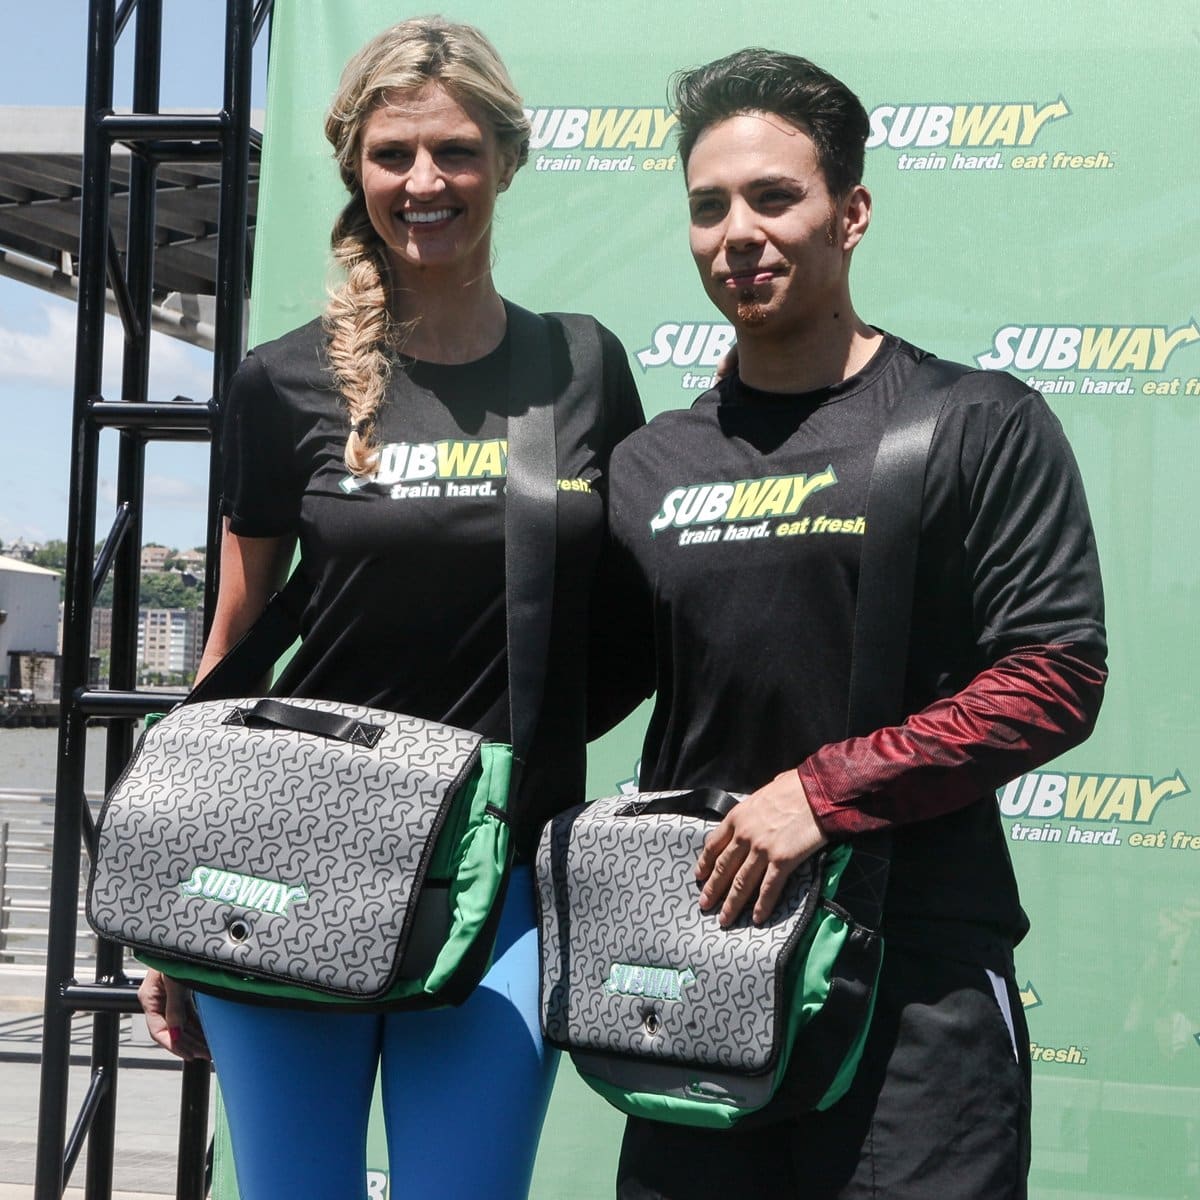 American short track speed skater Apolo Ohno and sportscaster Erin Andrews introduce the new limited edition Subway bag